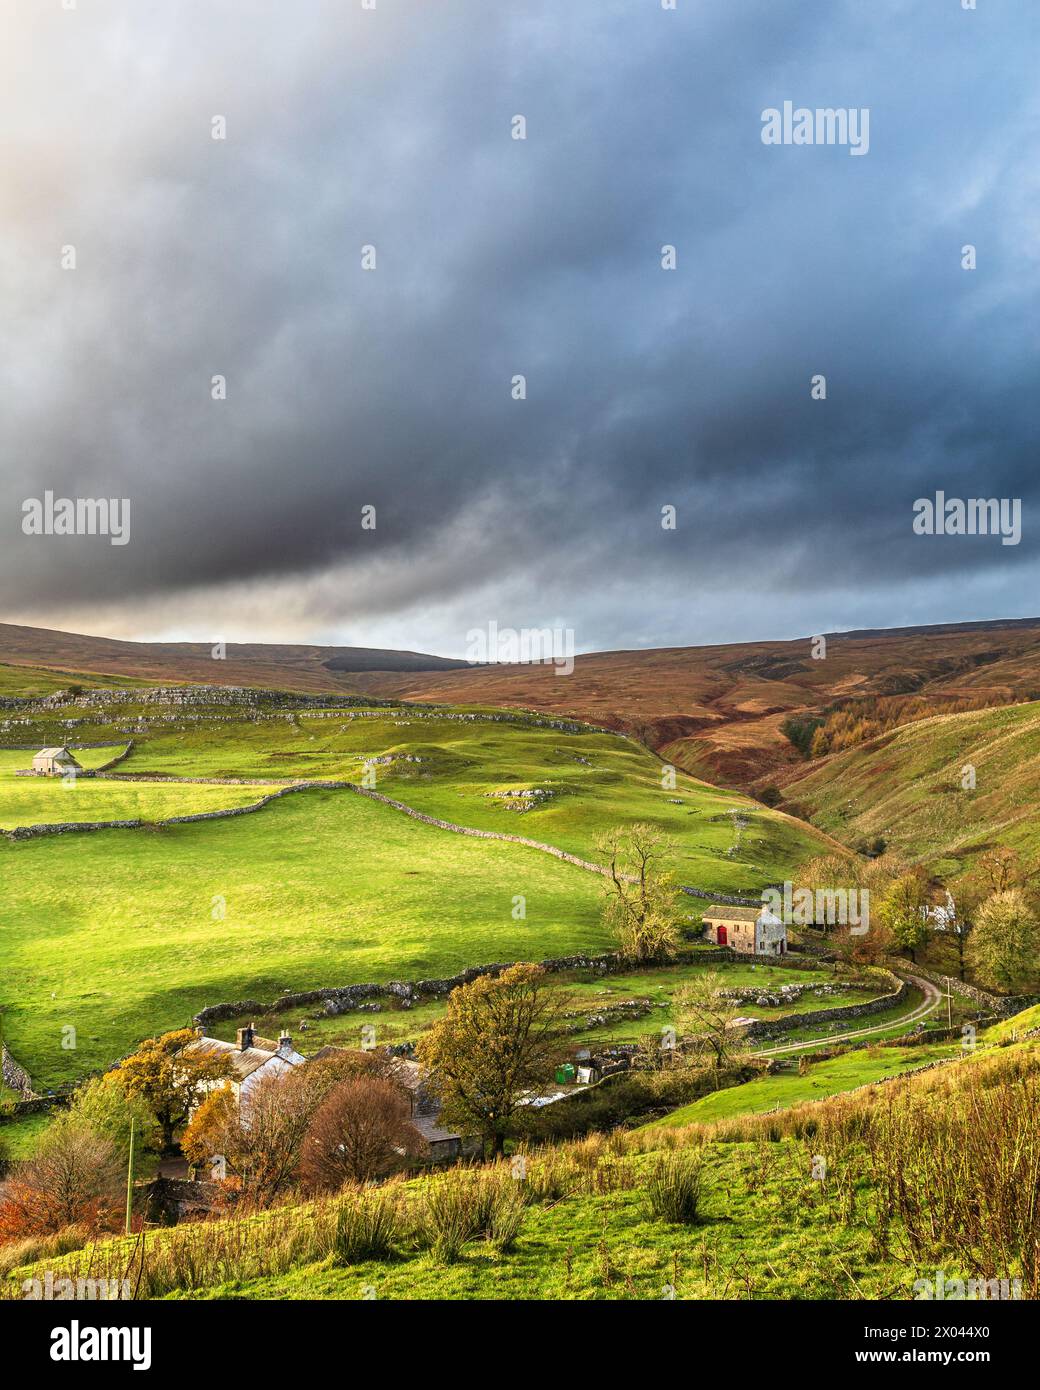 Farm buildings in Littondale, Yorkshire Dales, England. Stock Photo